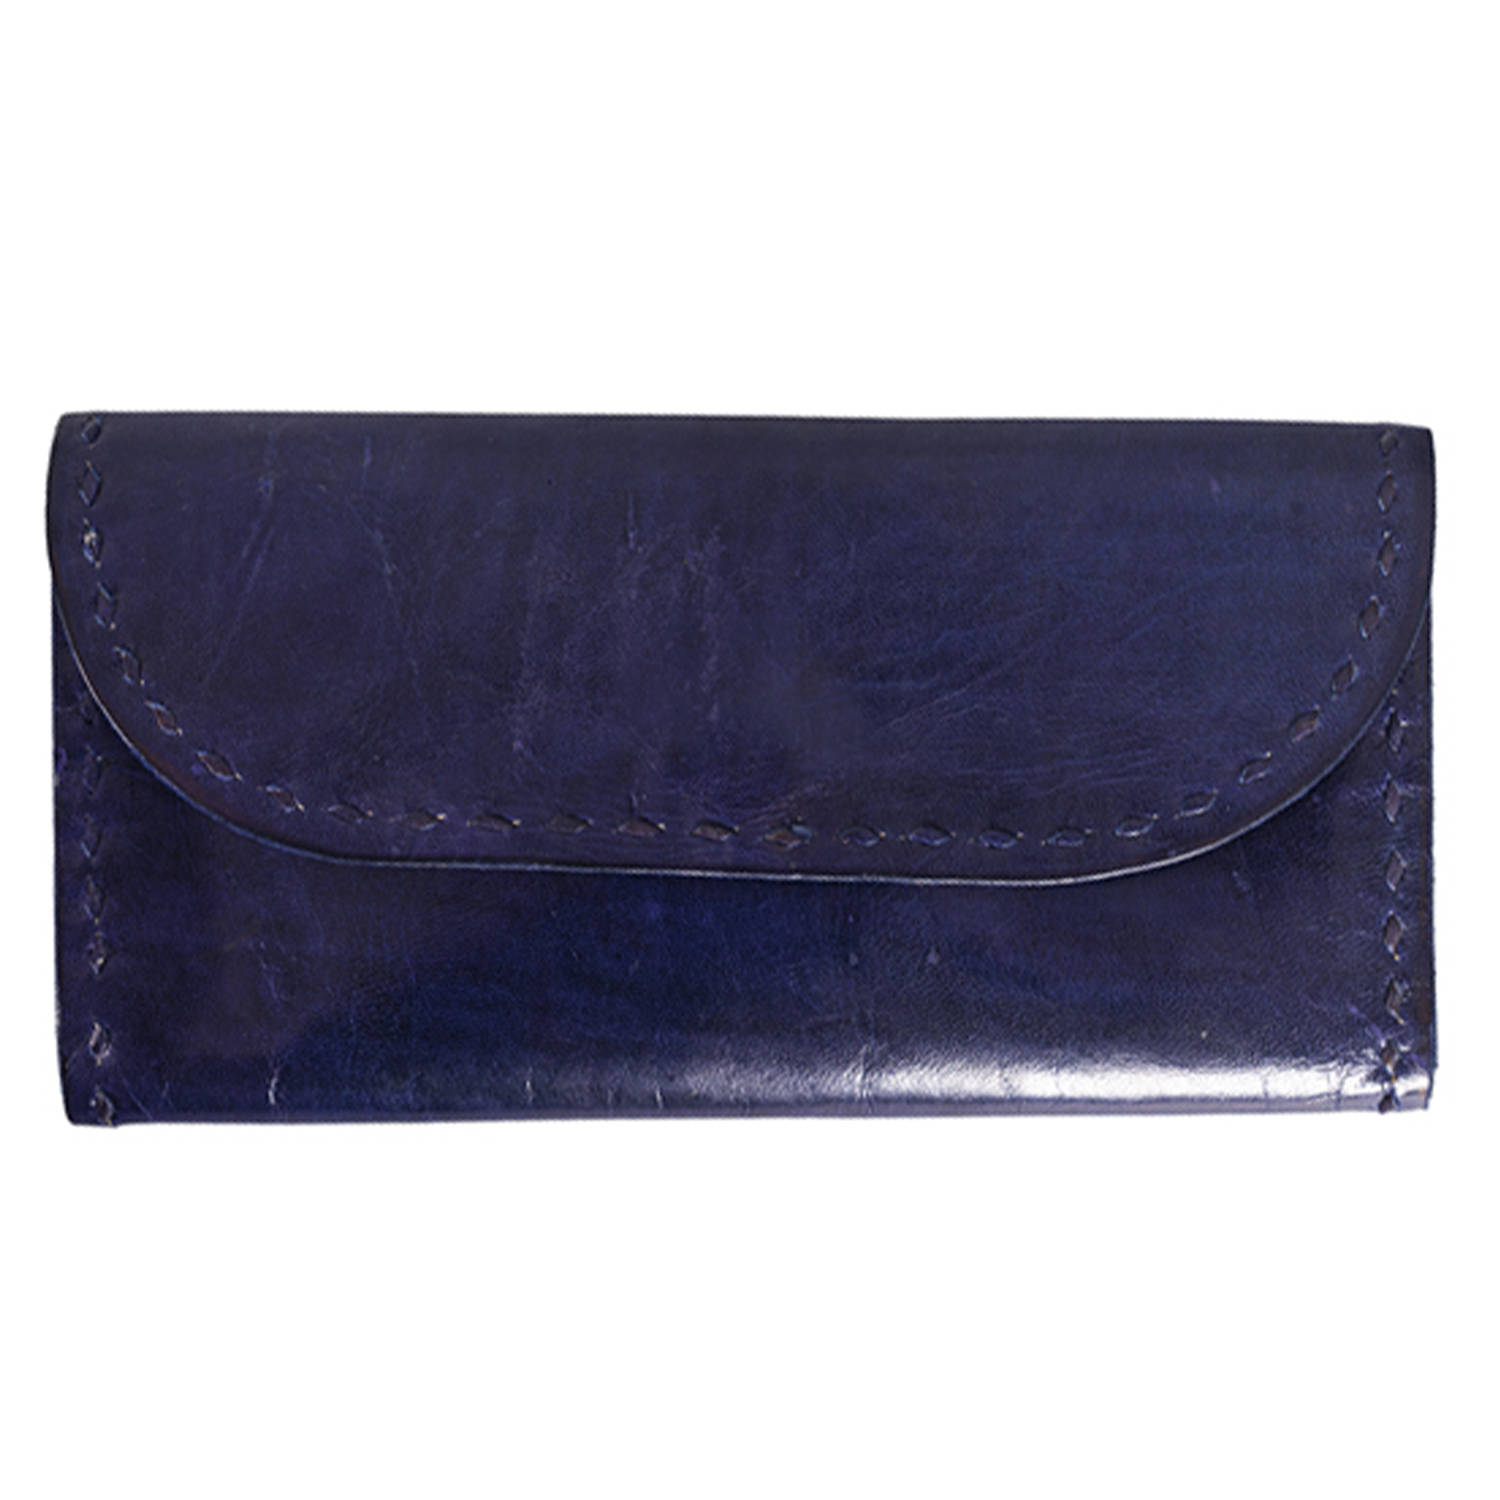 Purse (Christine) Blue smooth leather small ladies wallet – Wild Harry